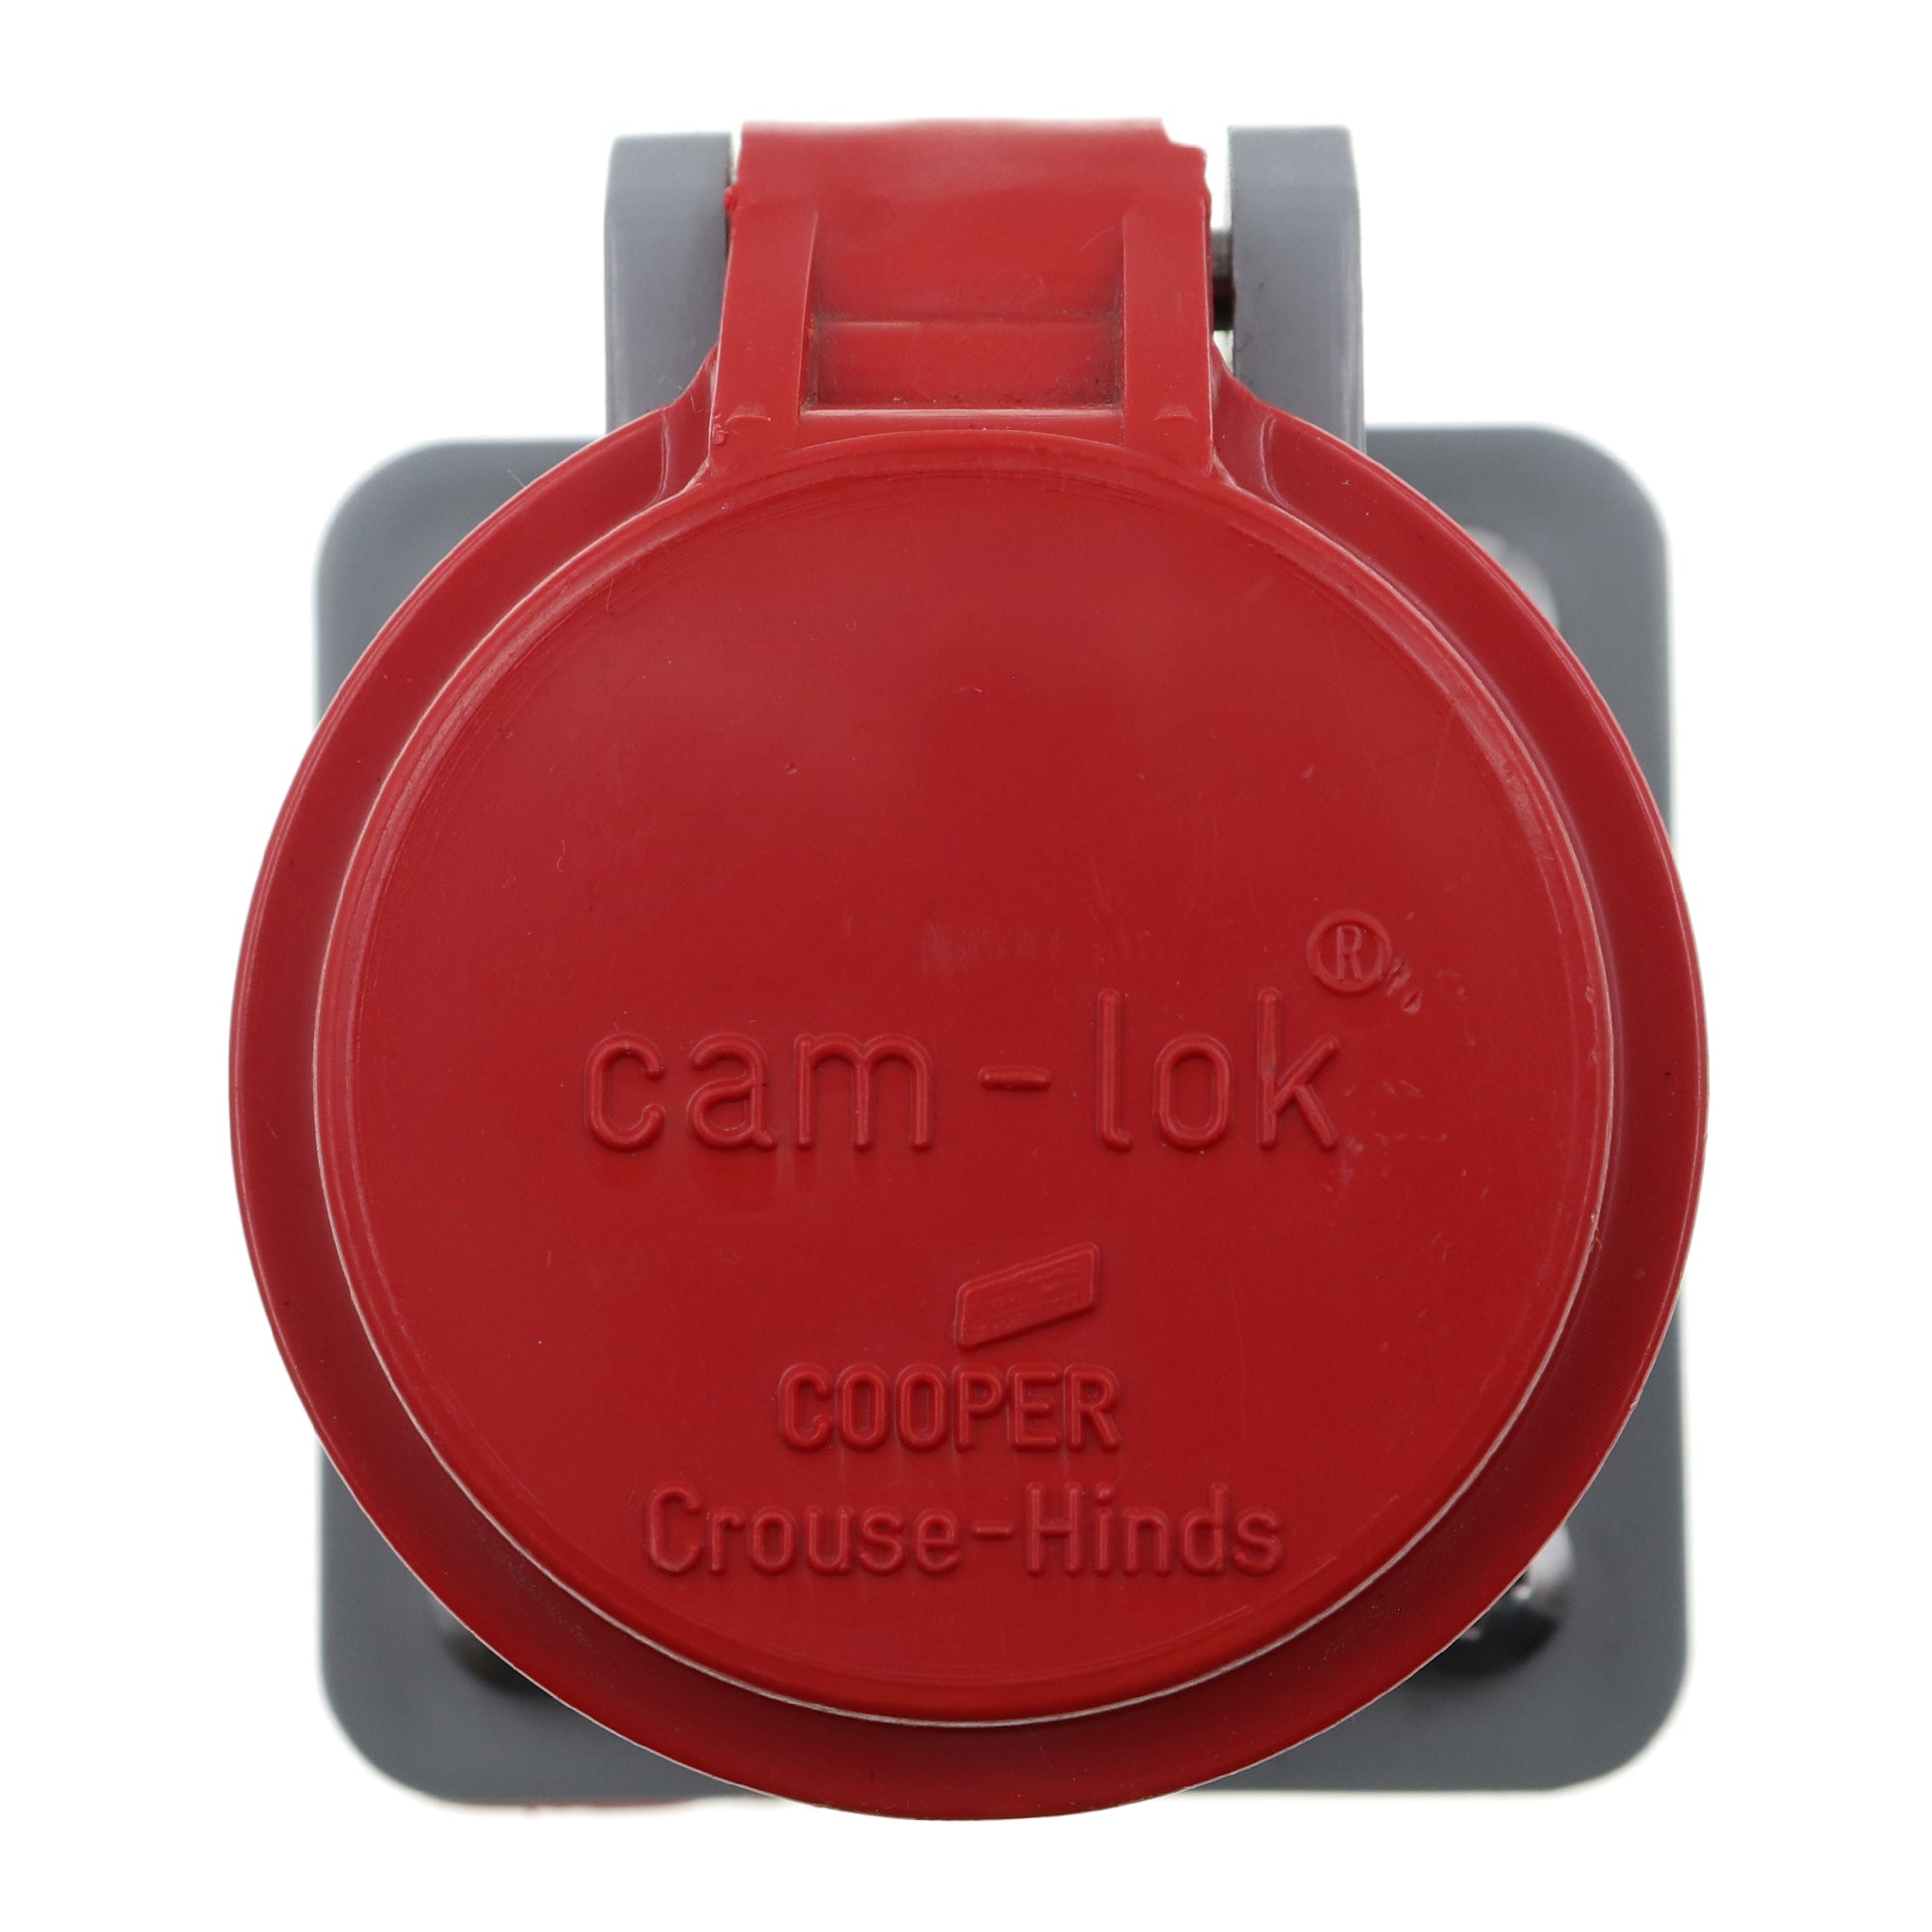 Crouse Hinds, CROUSE-HINDS E1016SC-36 J TYPE CAMLOCK FEMALE RECEPTACLE COVER, RED